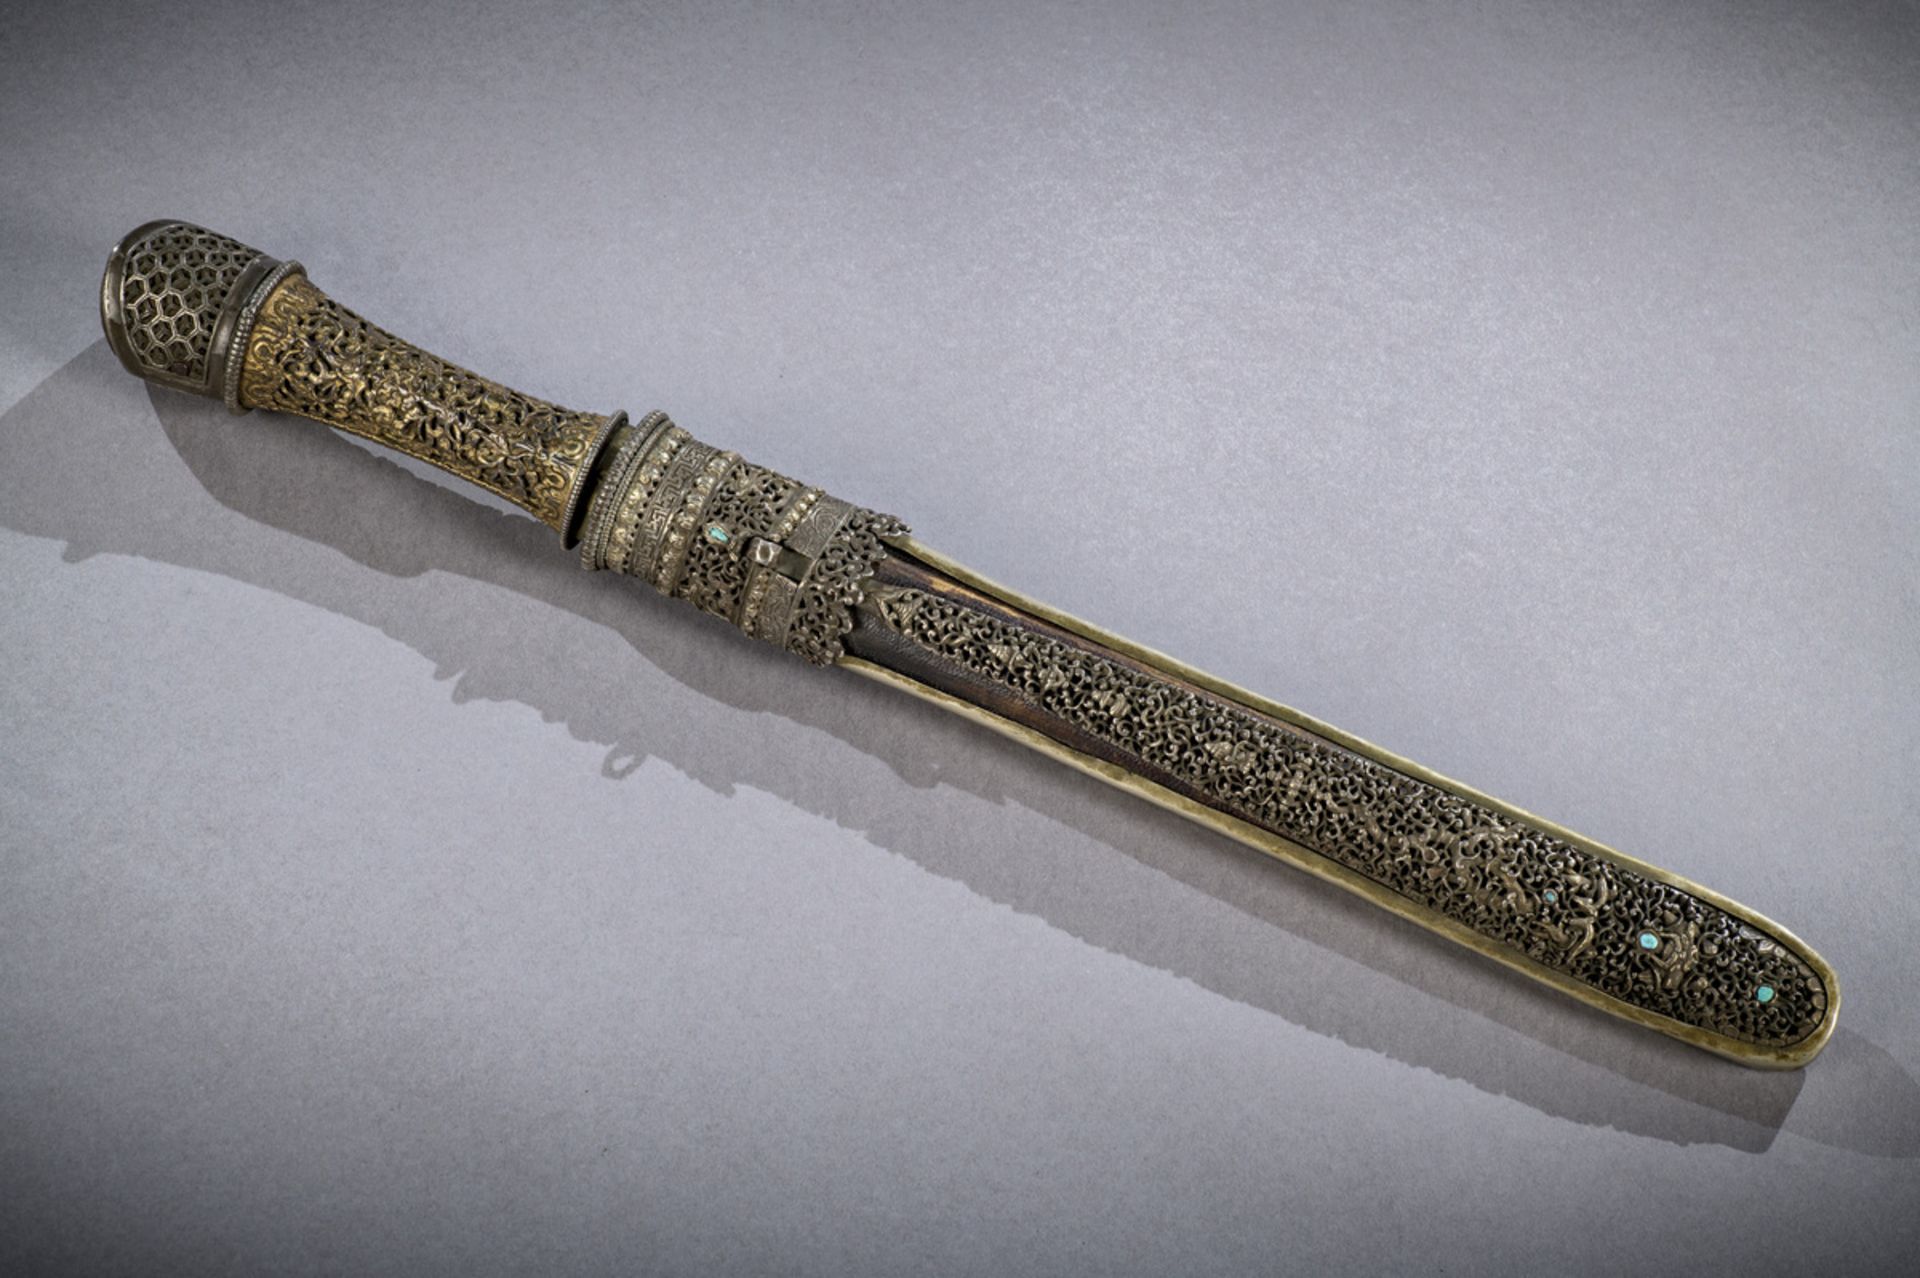 A dagger with openwork iron and gilt bronze decoration, Bhutan 18th - 19th century (tot 46.5 cm)